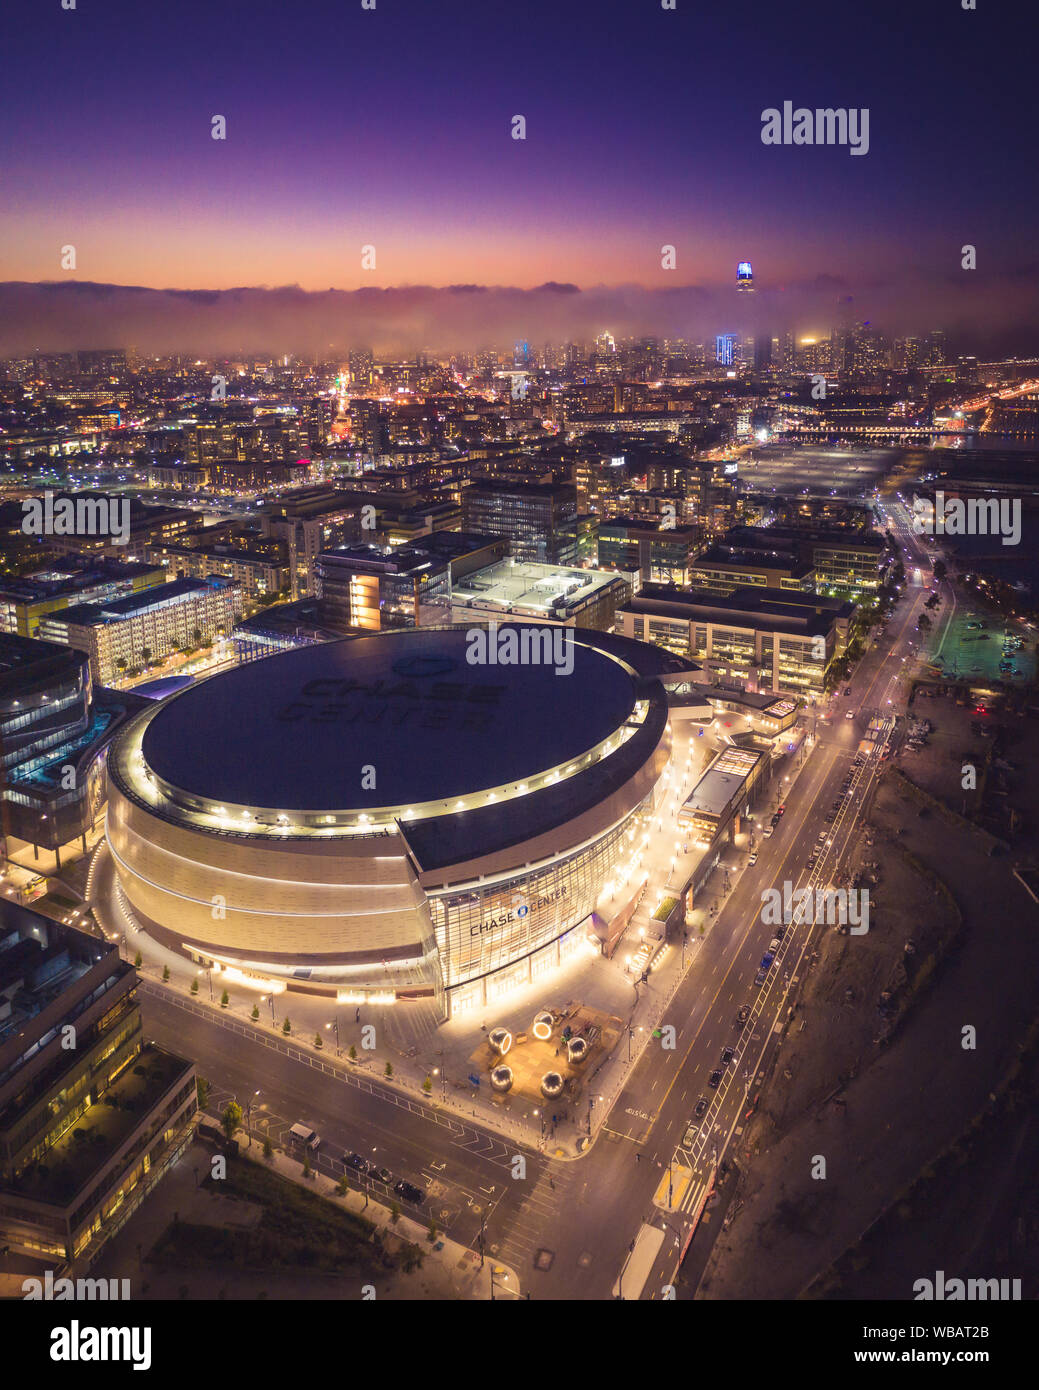 San Francisco, California / USA - August 24, 2019: Aerial View of the Chase Center Warriors Arena and the San Francisco Skyline at Night Stock Photo